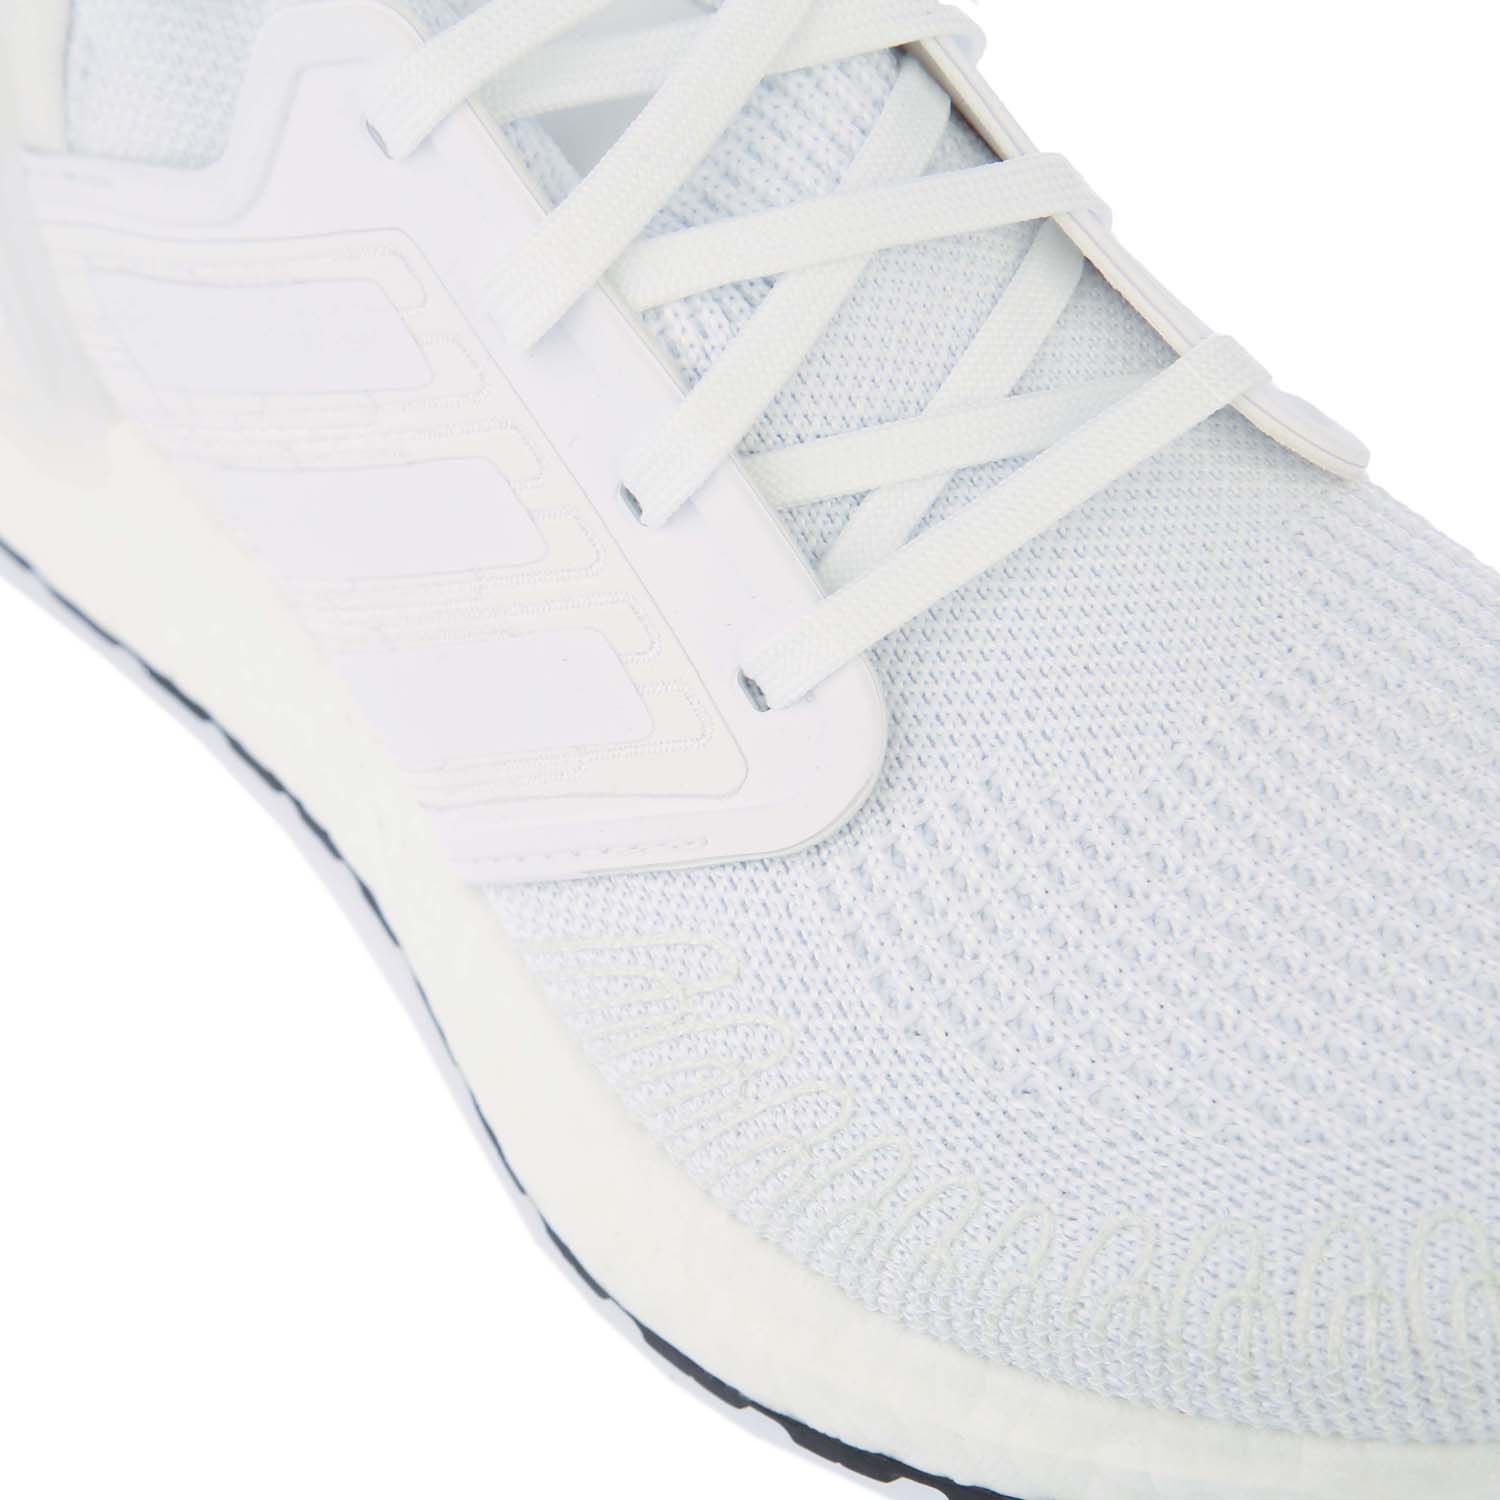 Womans adidas Ultraboost 20 Running Shoes in white.- adidas Primeknit+ textile upper.- Lace closure.- Tailored Fibre Placement locked-in fit.- High-performance running shoes.- Responsive Boost midsole.- Soft  comfortable elastane heel.- Stretchweb outsole with Continental™ Rubber.- Ref.: EG0713